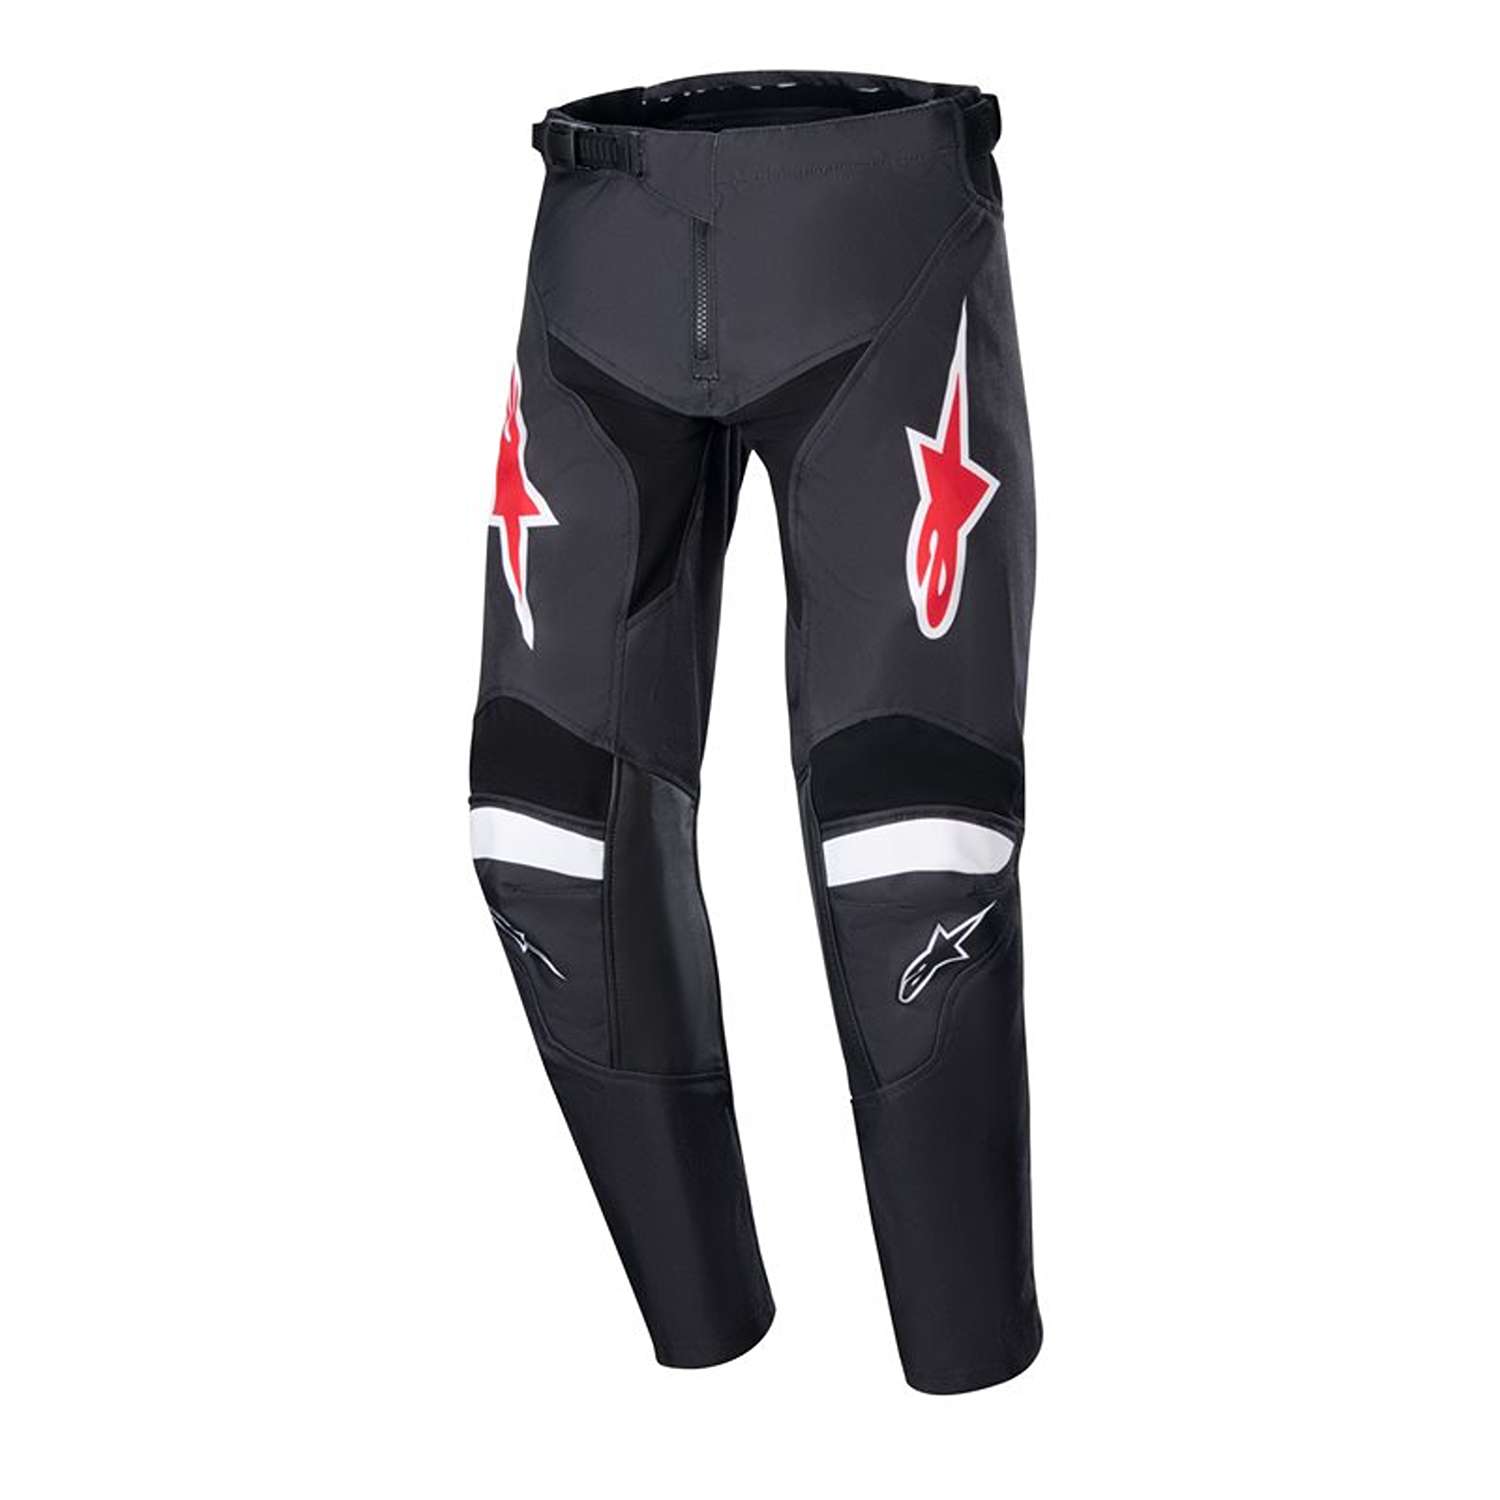 Image of Alpinestars Youth Racer Lucent Pants Black White Size 22 ID 8059347267425